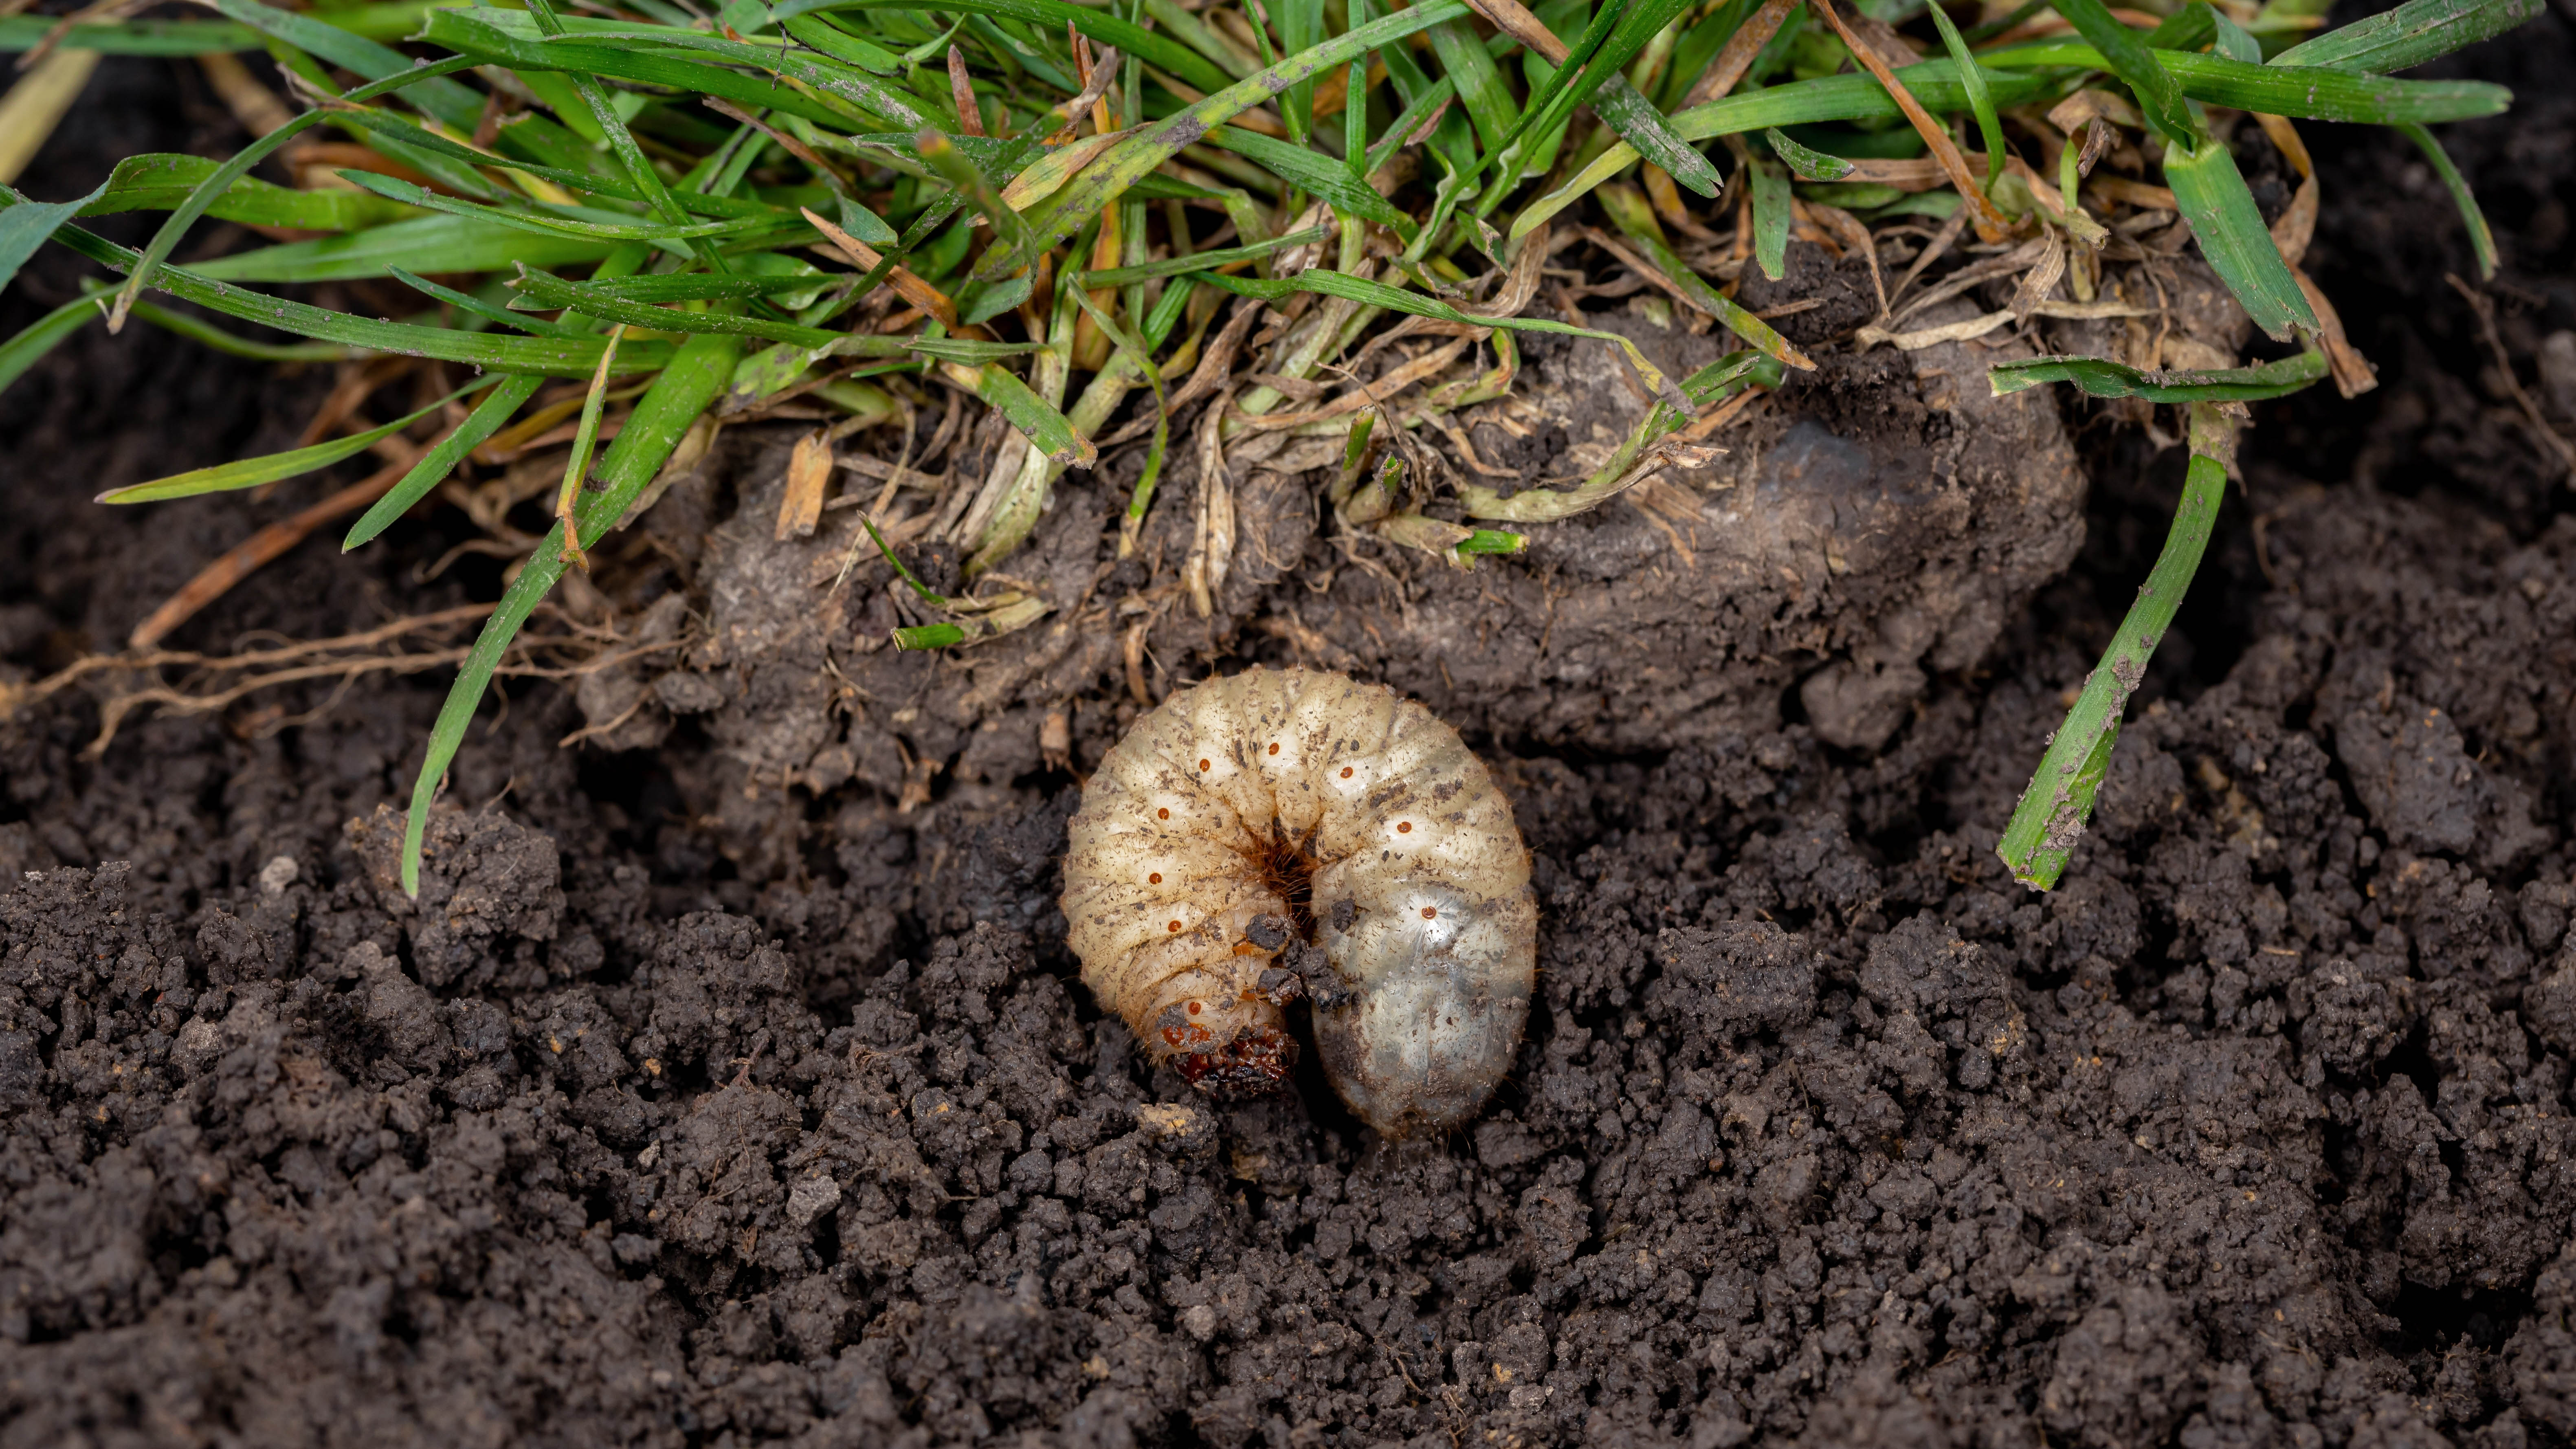 a white grub in the soil next to the grass